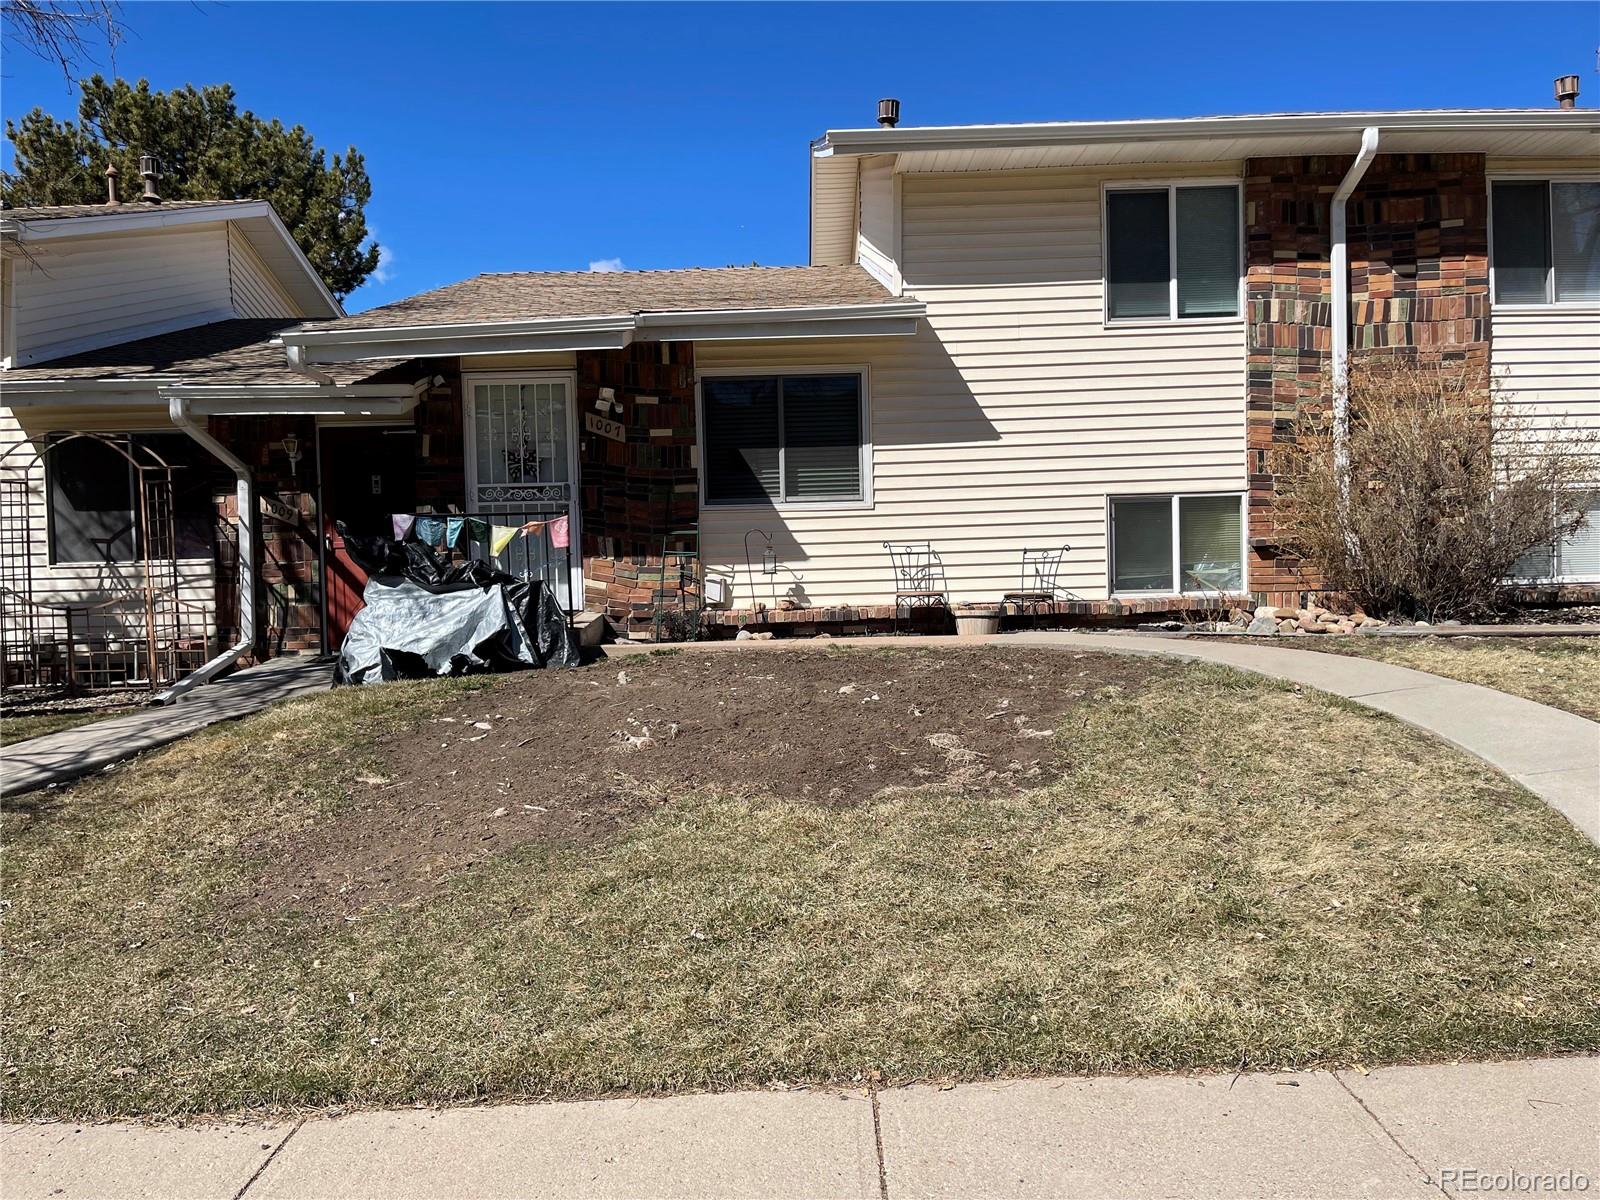 Report Image for 1007 S Miller Way,Lakewood, Colorado